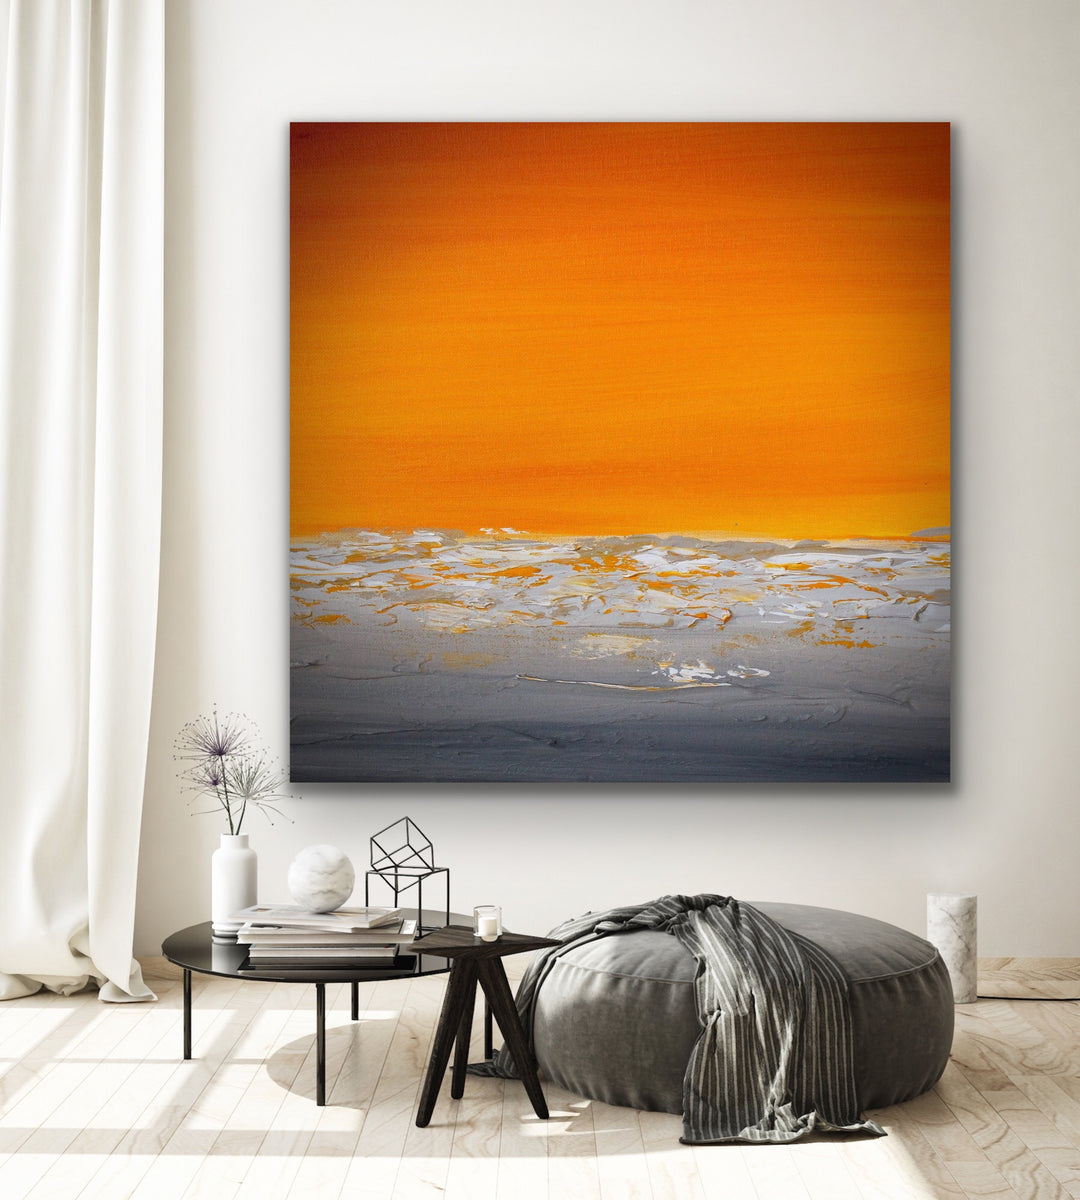 Sunset shore 5 - Custom Art - Original Contemporary Modern Abstract Paintings by Preethi Arts